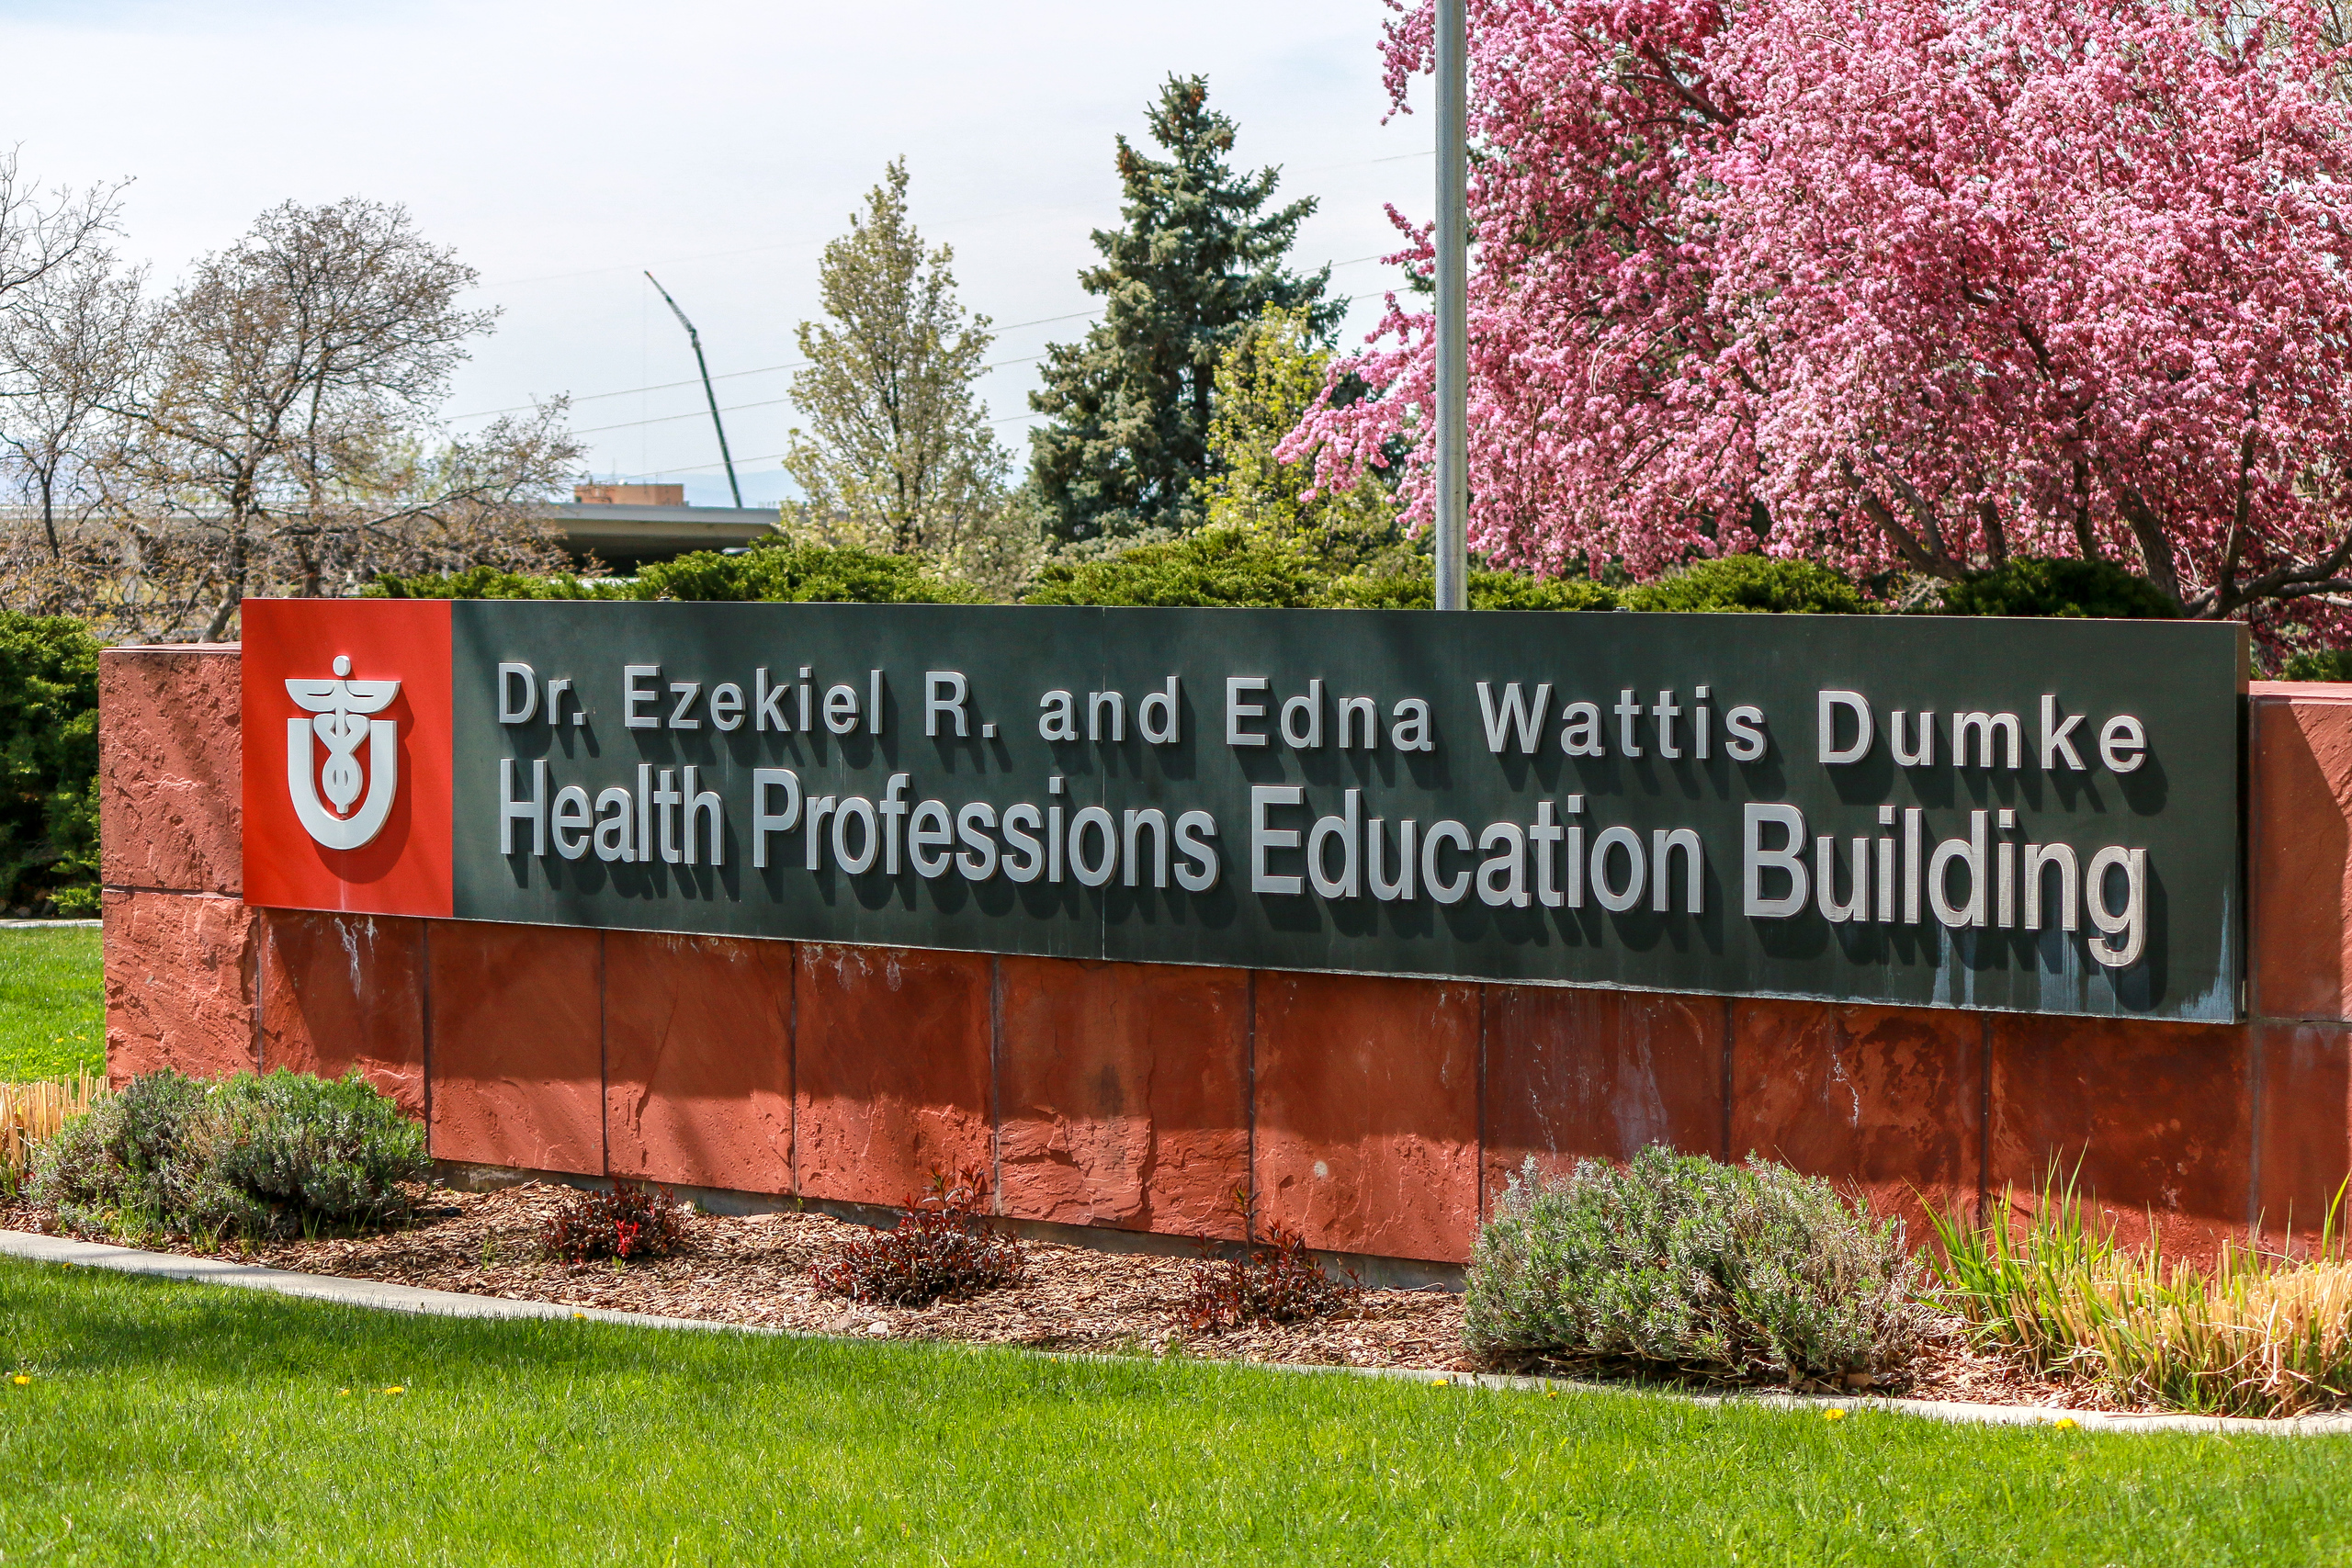 Dr. Ezekiel R. and Edna Wattis Dumke Health Professions Education Building Sign With Spring Blooms